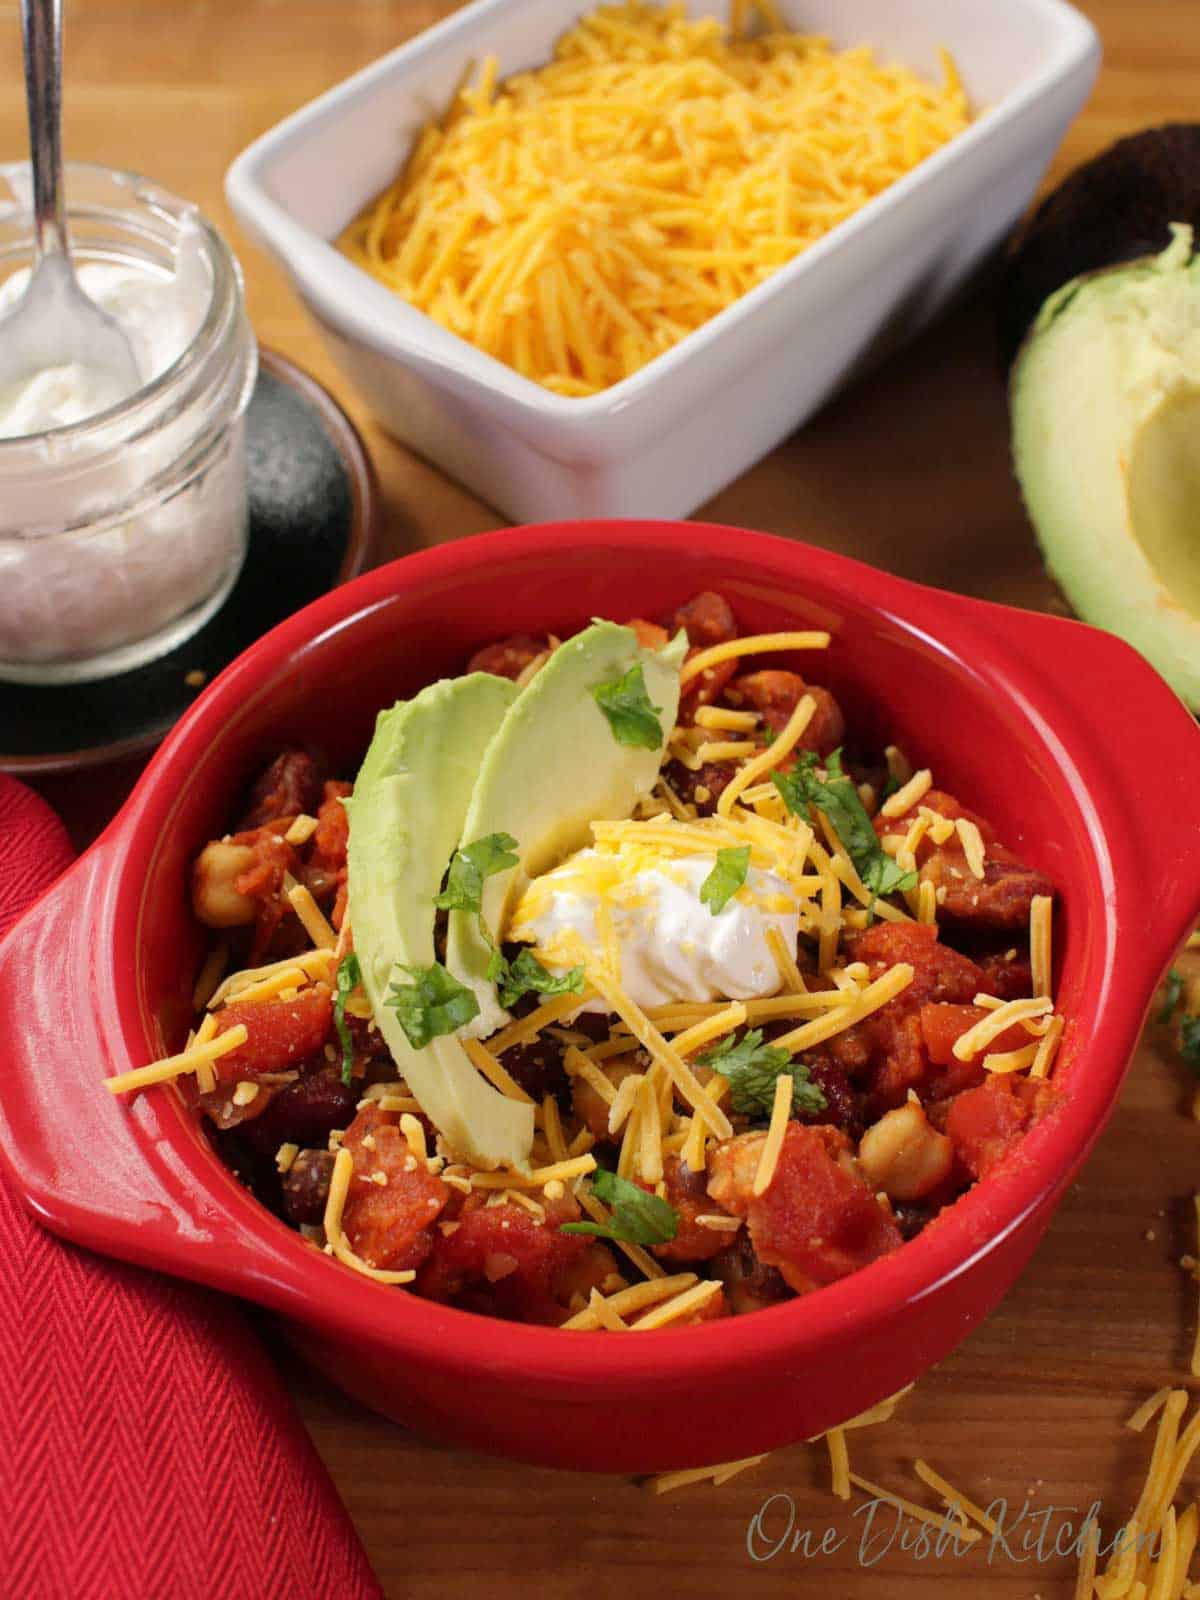 A red circular baking dish full of chili with beans, onions, and tomatoes, topped with two avocado slices, shredded cheese, and a dollop of sour cream, next to a small jar of sour cream, a dish of shredded cheese, and half of an avocado.